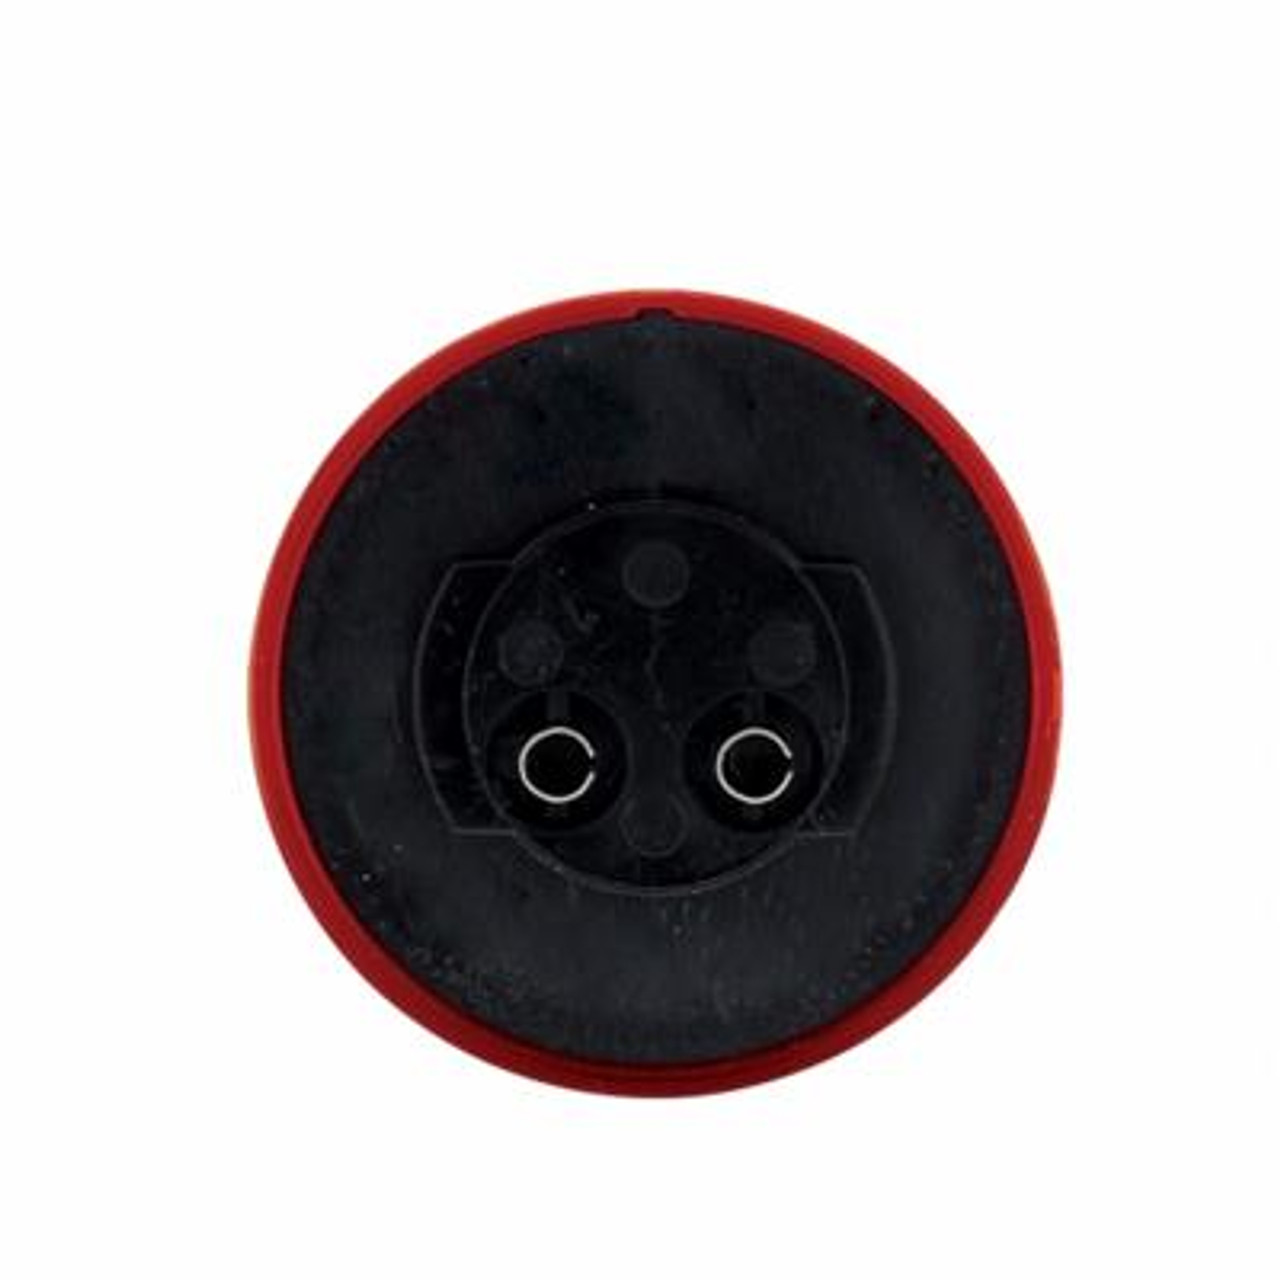 9 LED 2" Round Mirage Light (Clearance/Marker) - Red LED/Red Lens